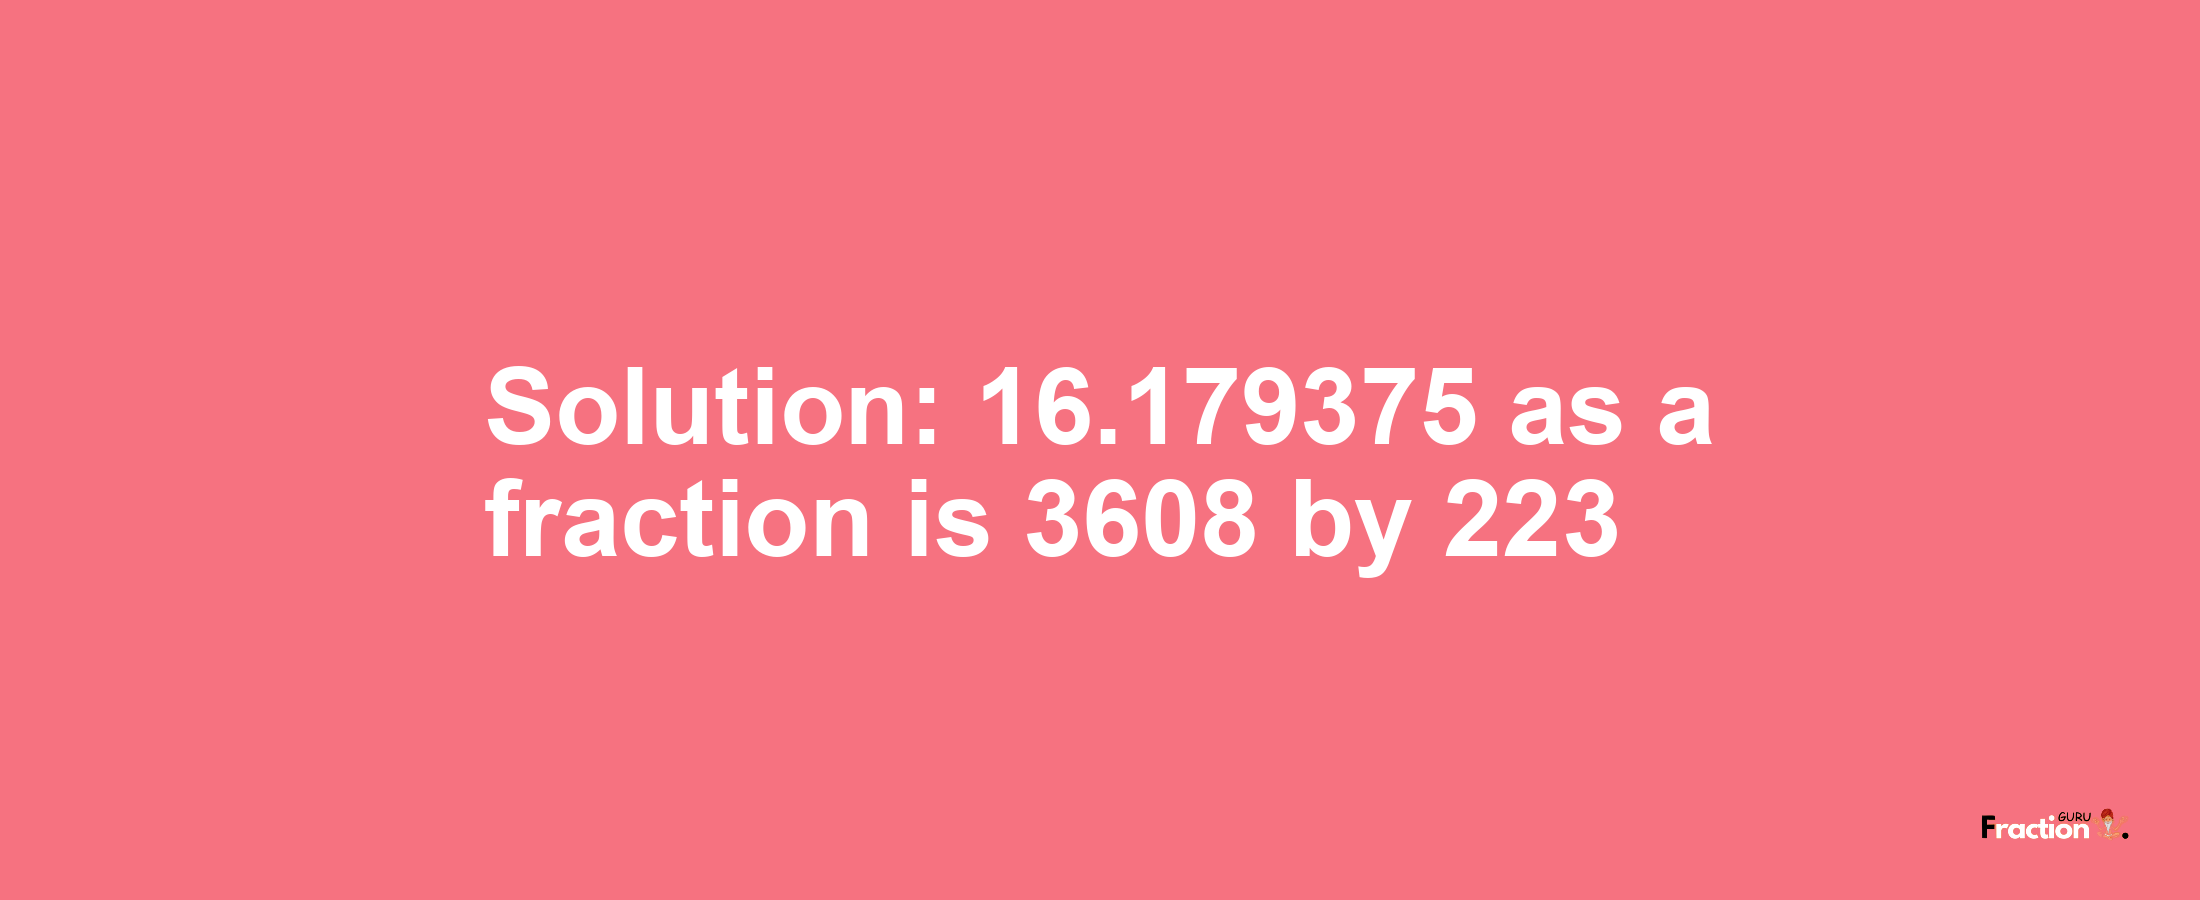 Solution:16.179375 as a fraction is 3608/223